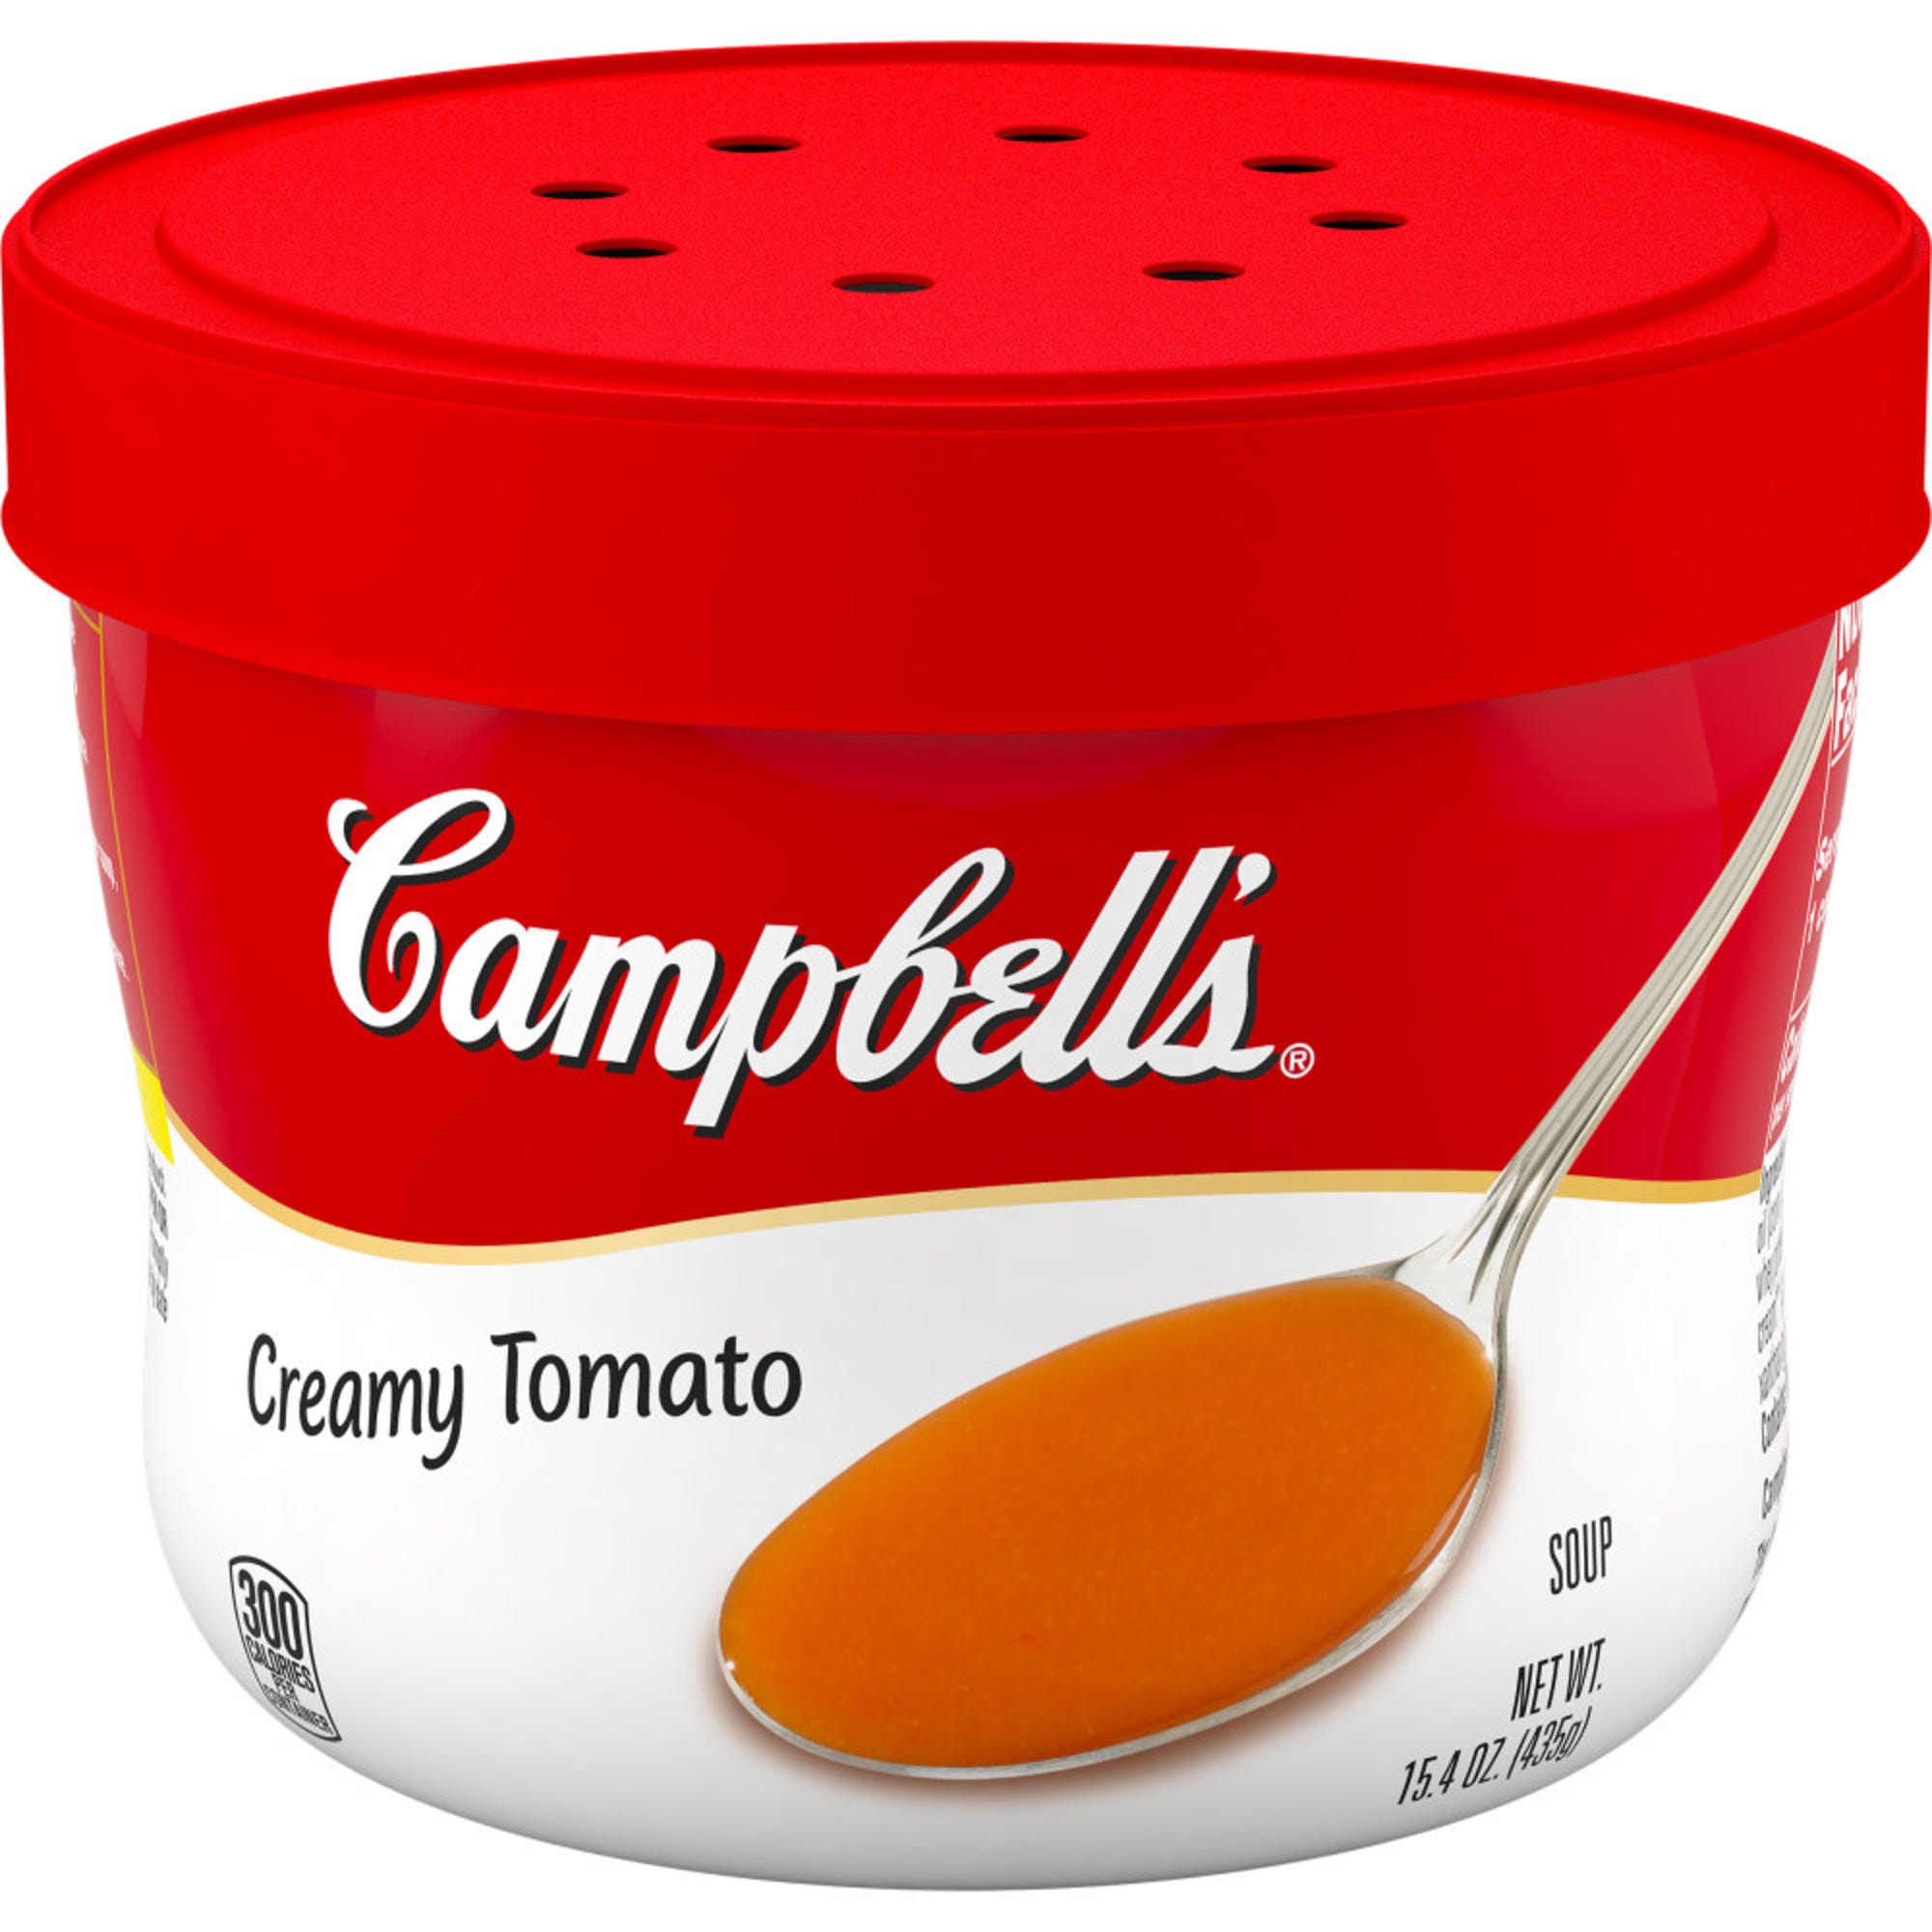 Campbell's Creamy Tomato Soup Microwavable Bowl - 15.4 oz